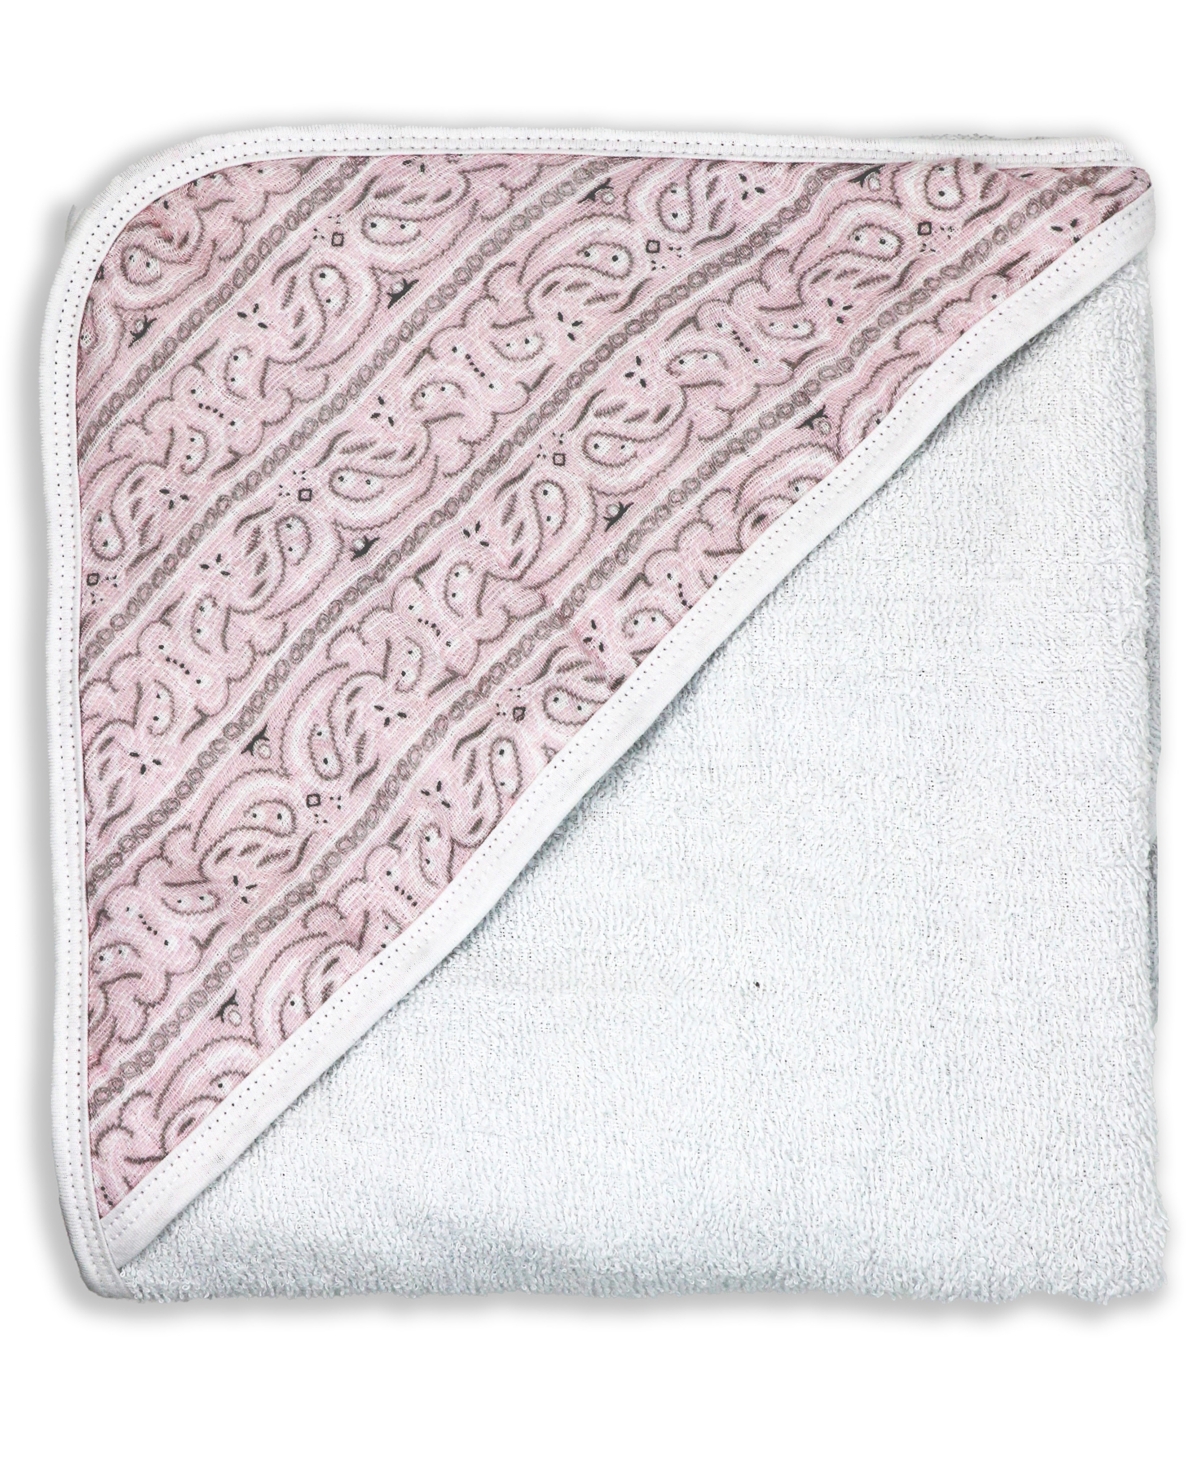 3 Stories Trading Baby Boys Or Baby Girls Muslin Lined Hooded Towel In Pink